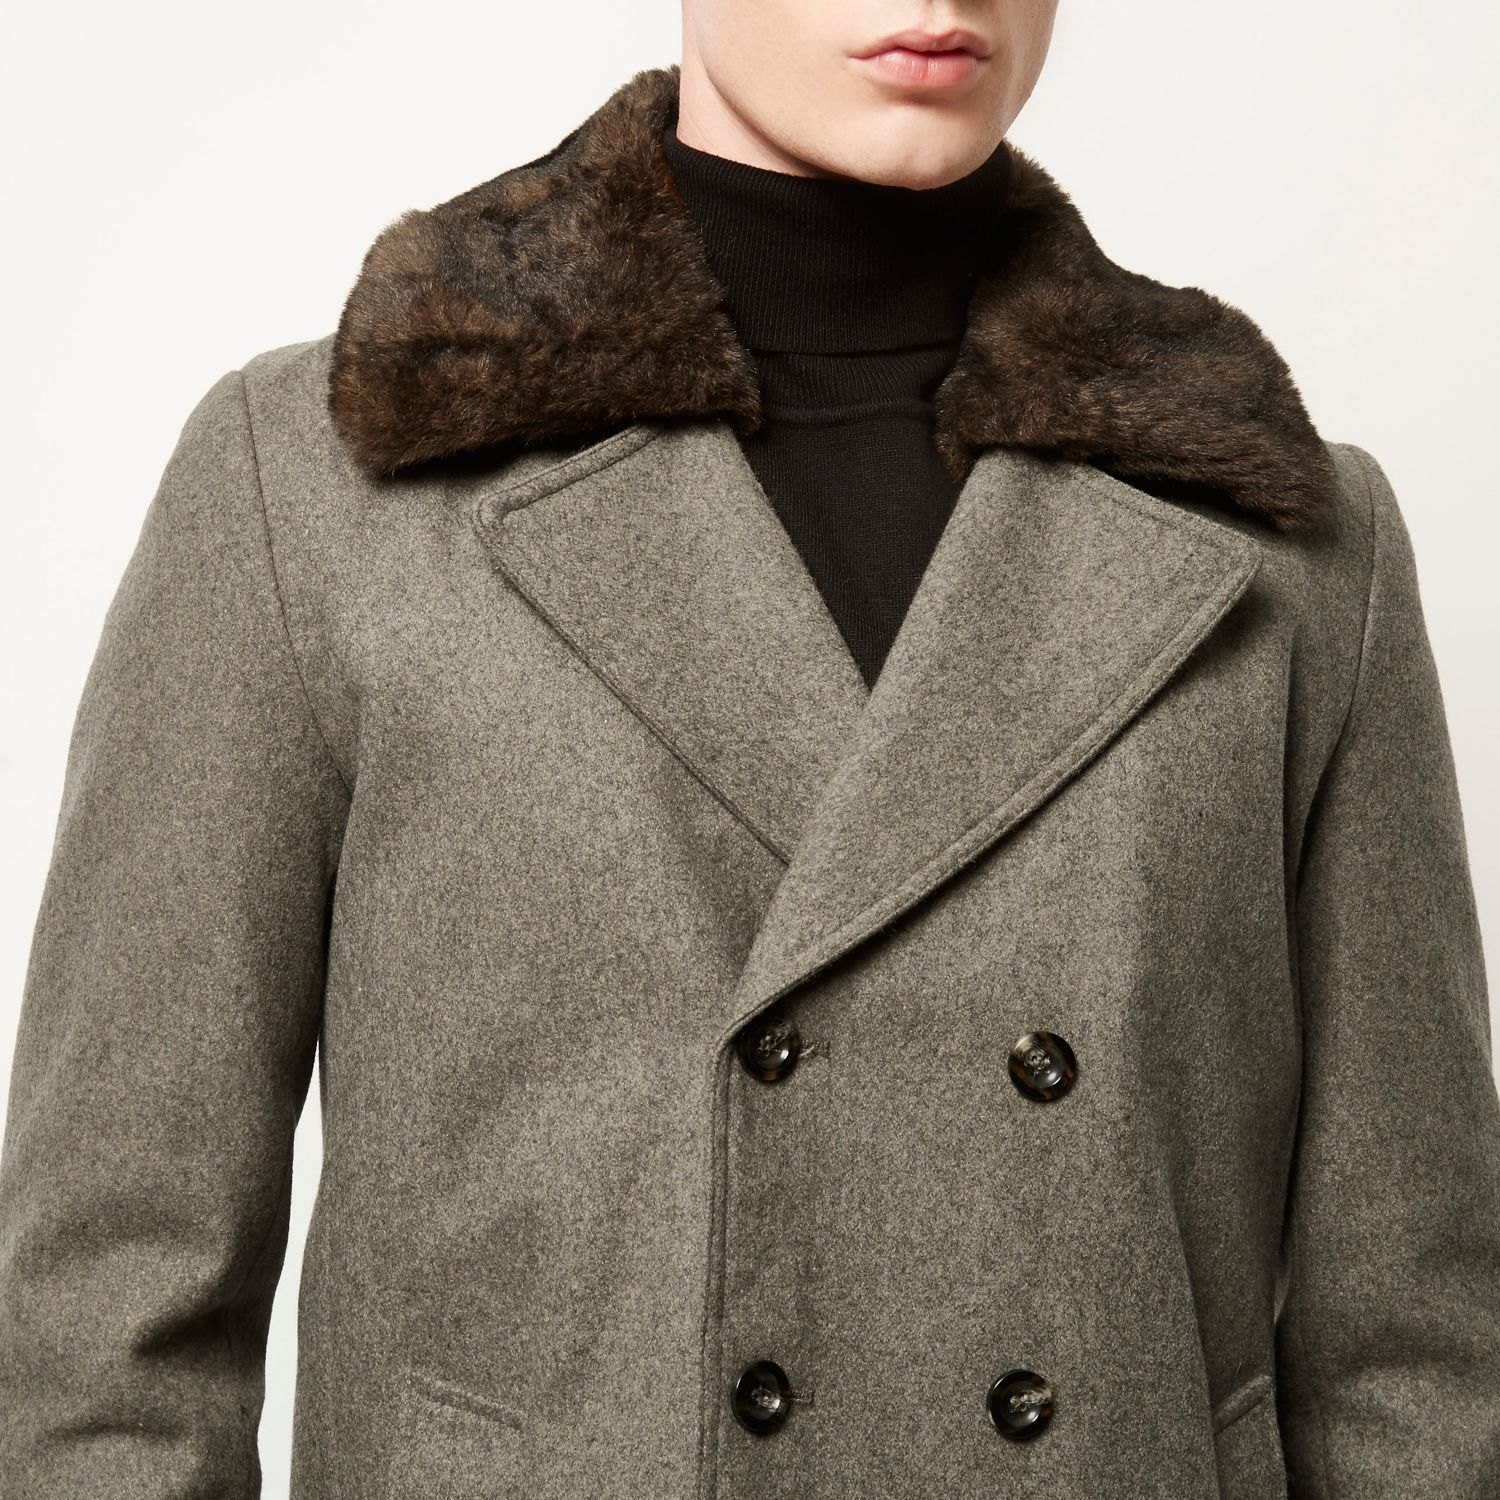 Mens Double Breasted Wool Overcoat Fur Collar Winter